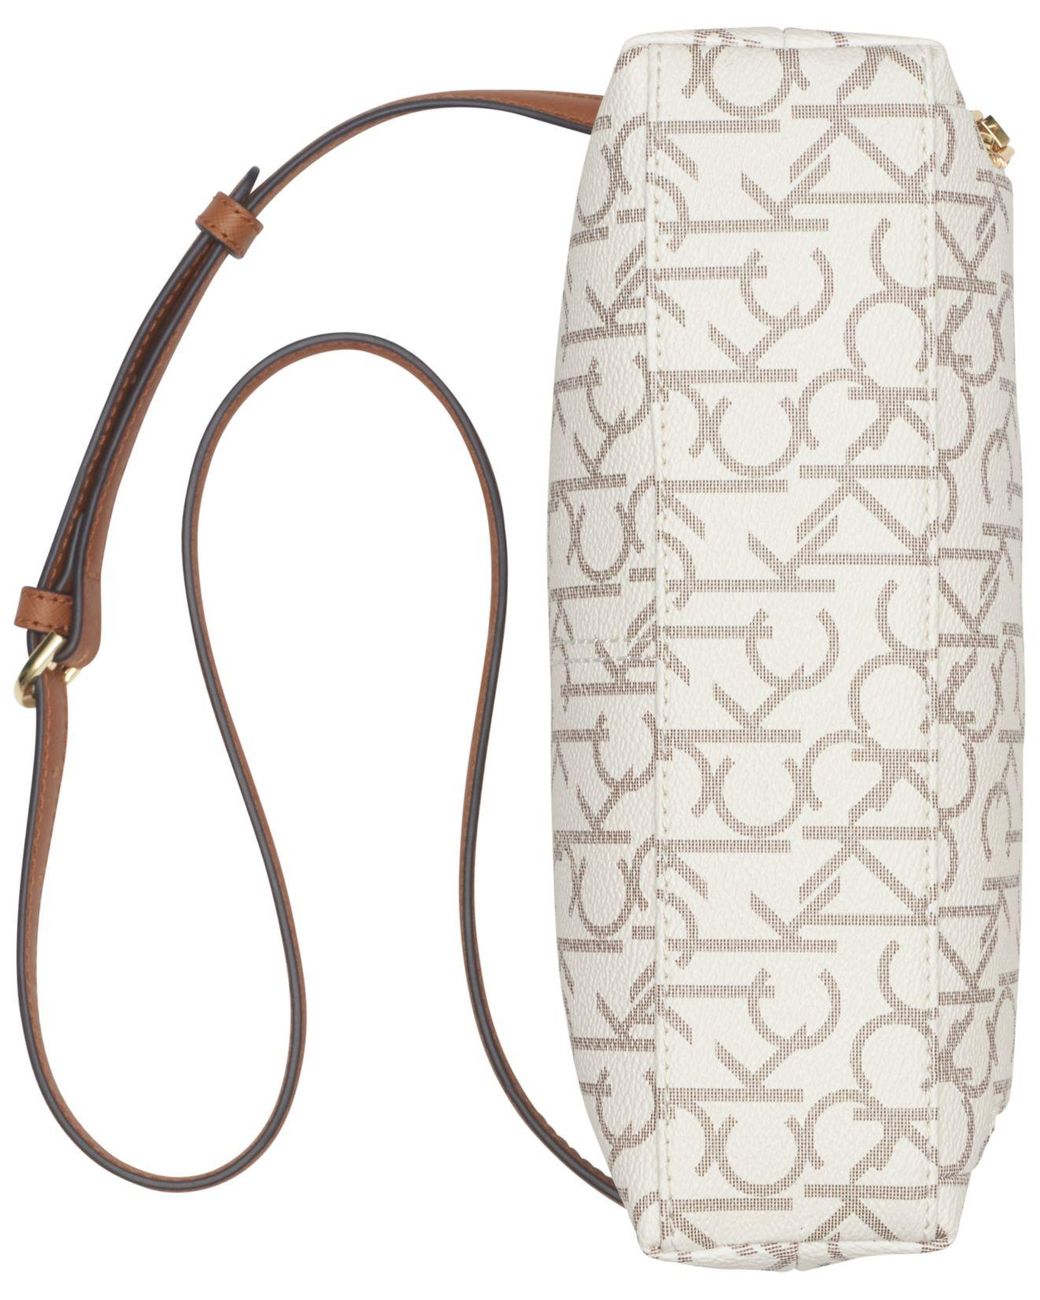 Calvin Klein Lily Signature Crossbody in Natural